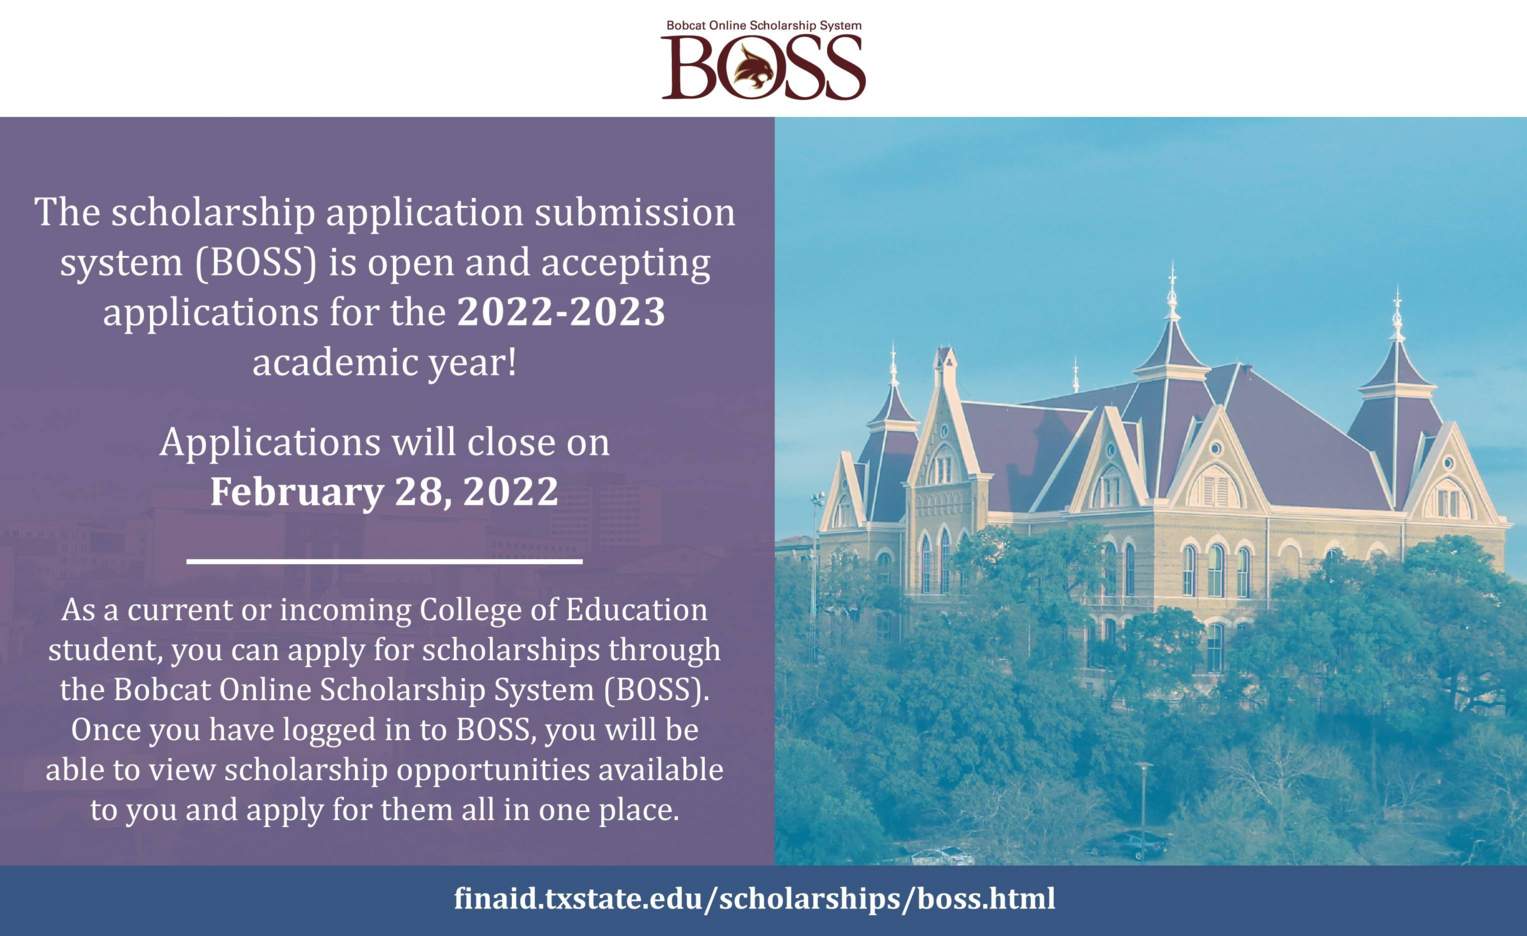 The Bobcat Online Scholarship System (BOSS) allows you to use one application to apply for as many Texas State scholarships as you’re interested in. We are in the process of making all department and college scholarships available through BOSS.